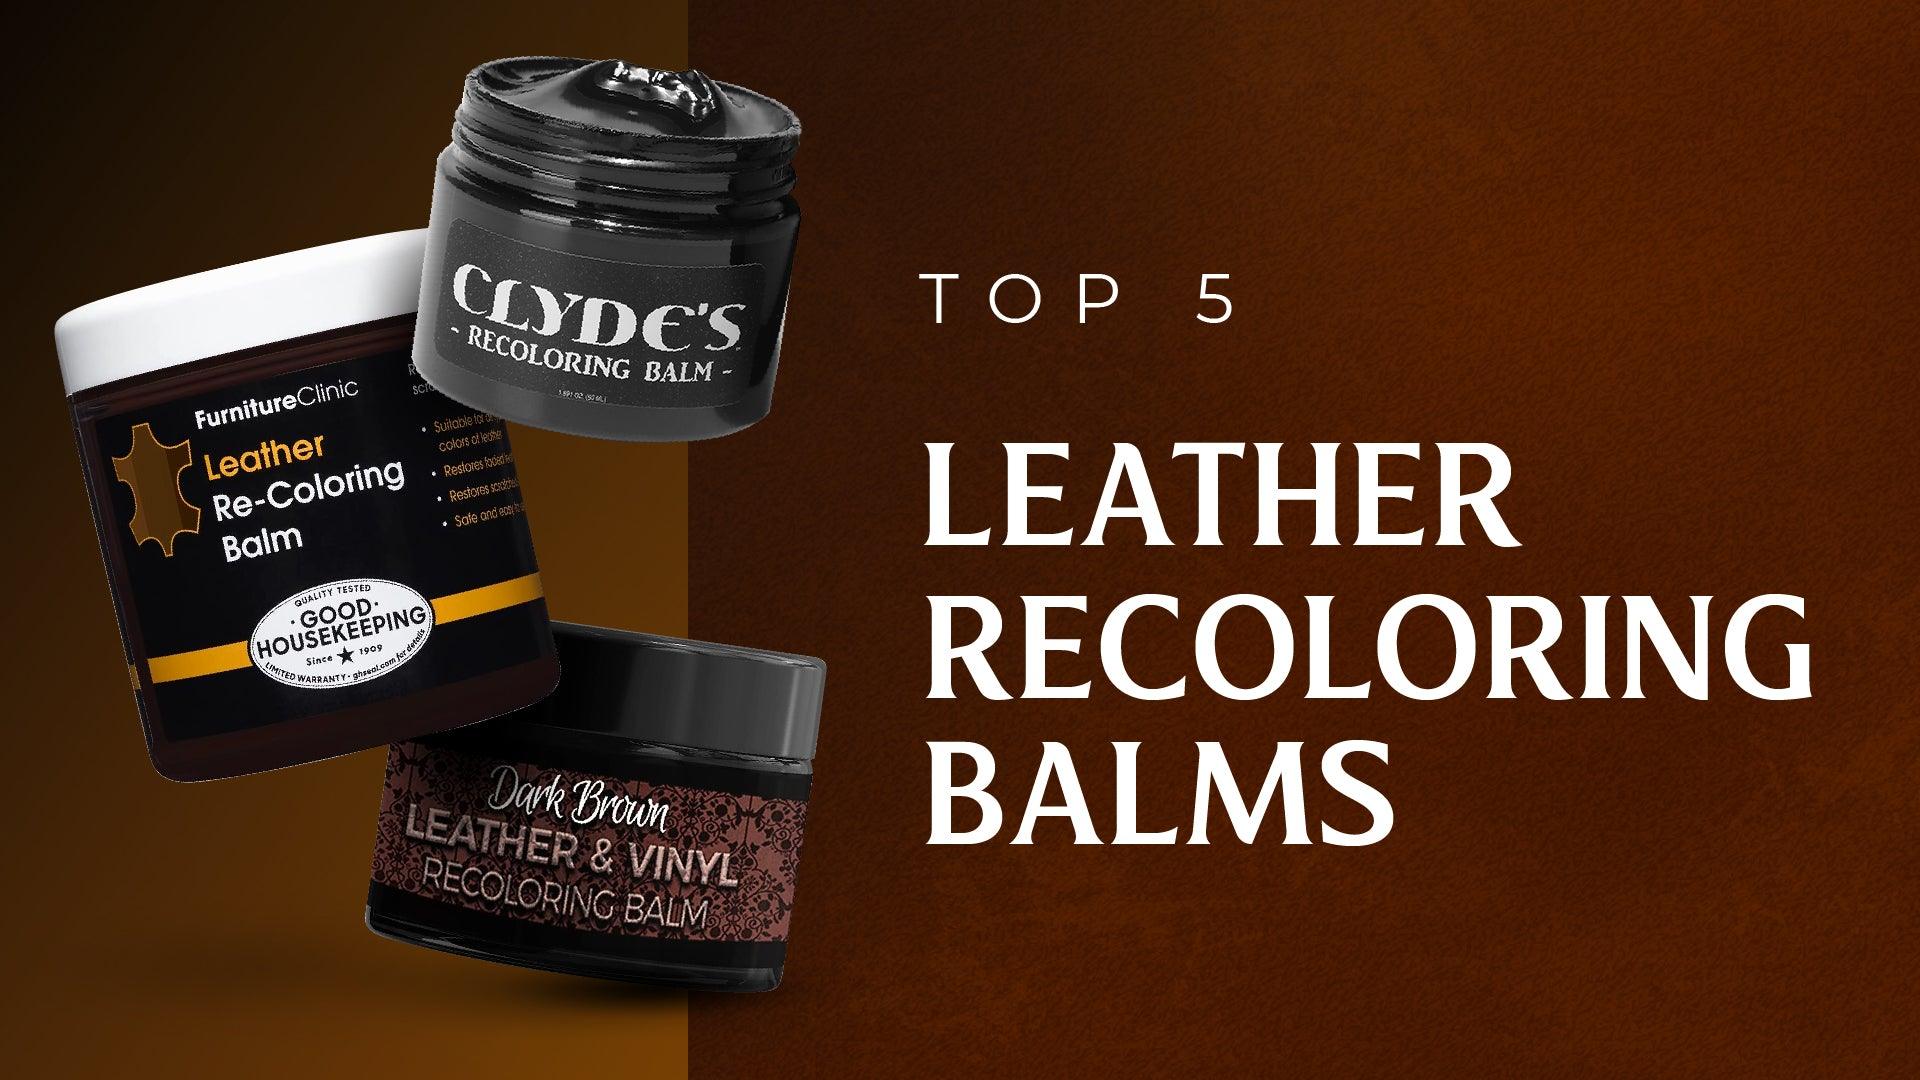 Top 5 Leather Recoloring Balms in 2022 – Clyde's Leather Company